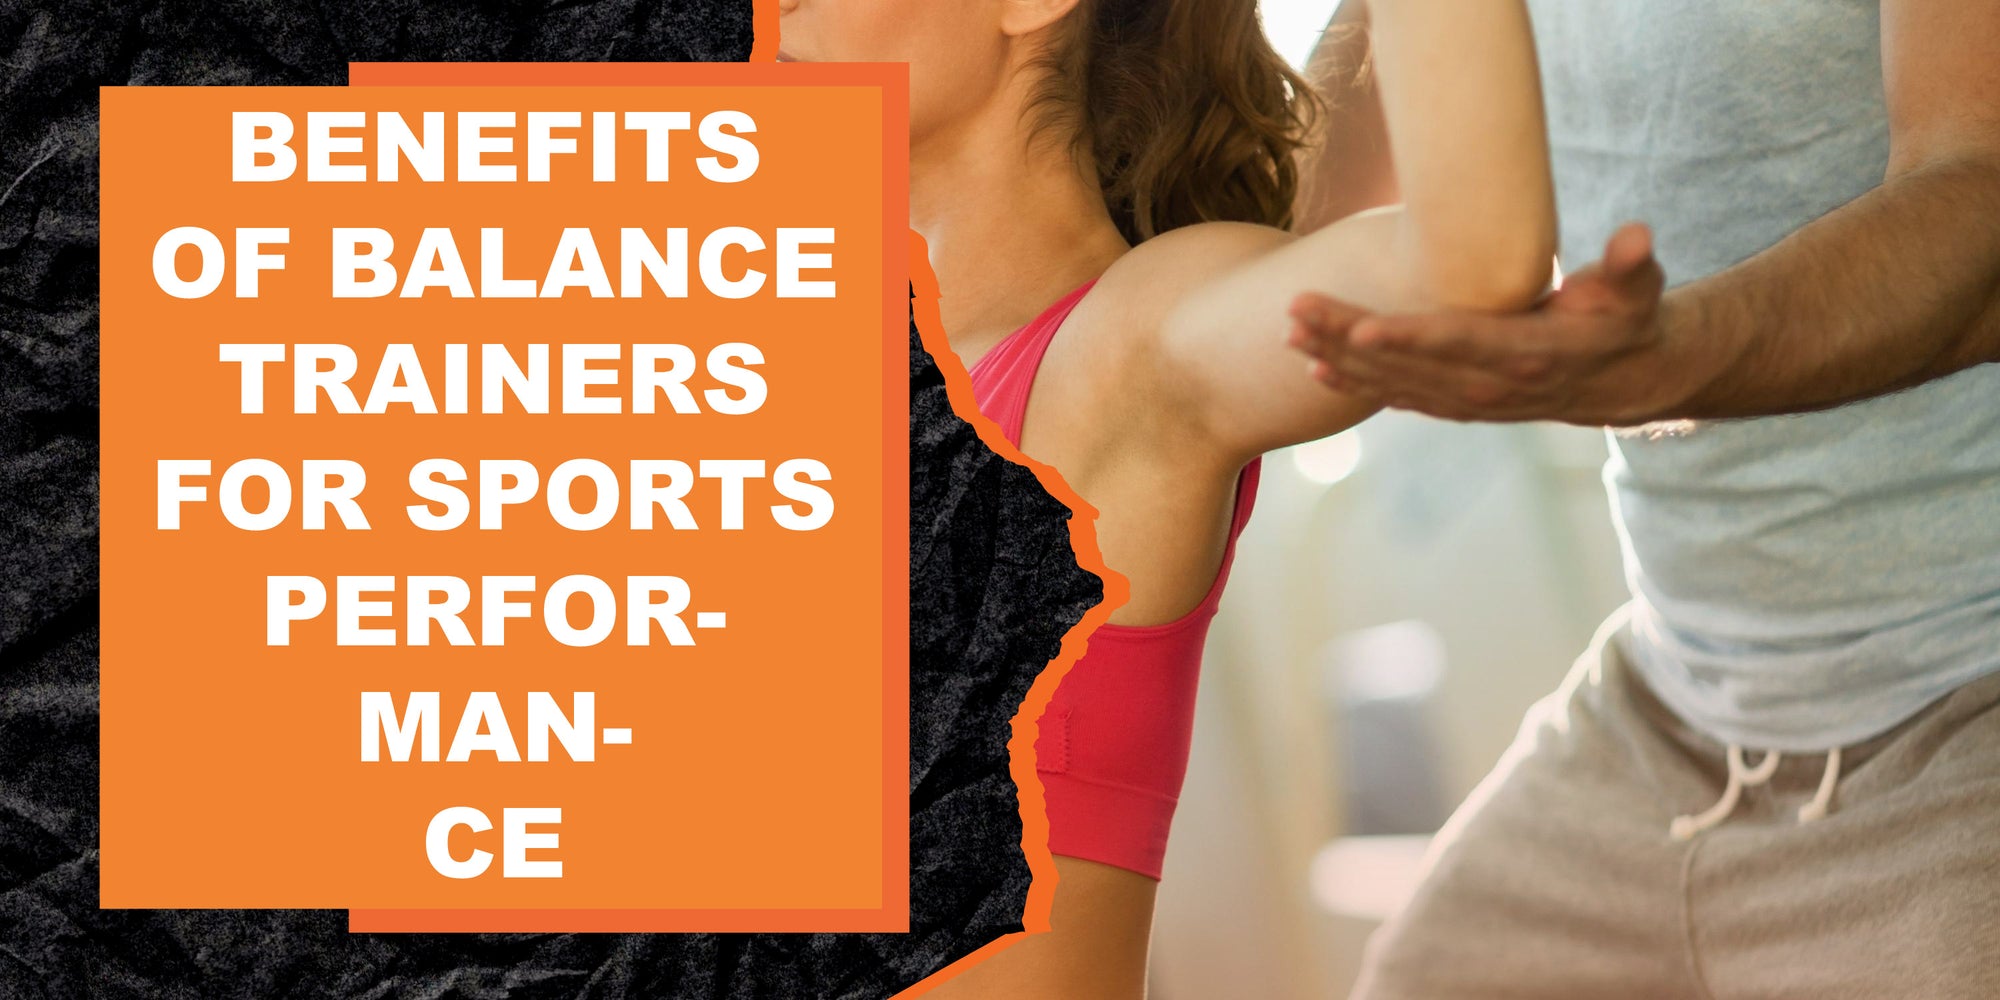 Benefits of Balance Trainers for Sports Performance